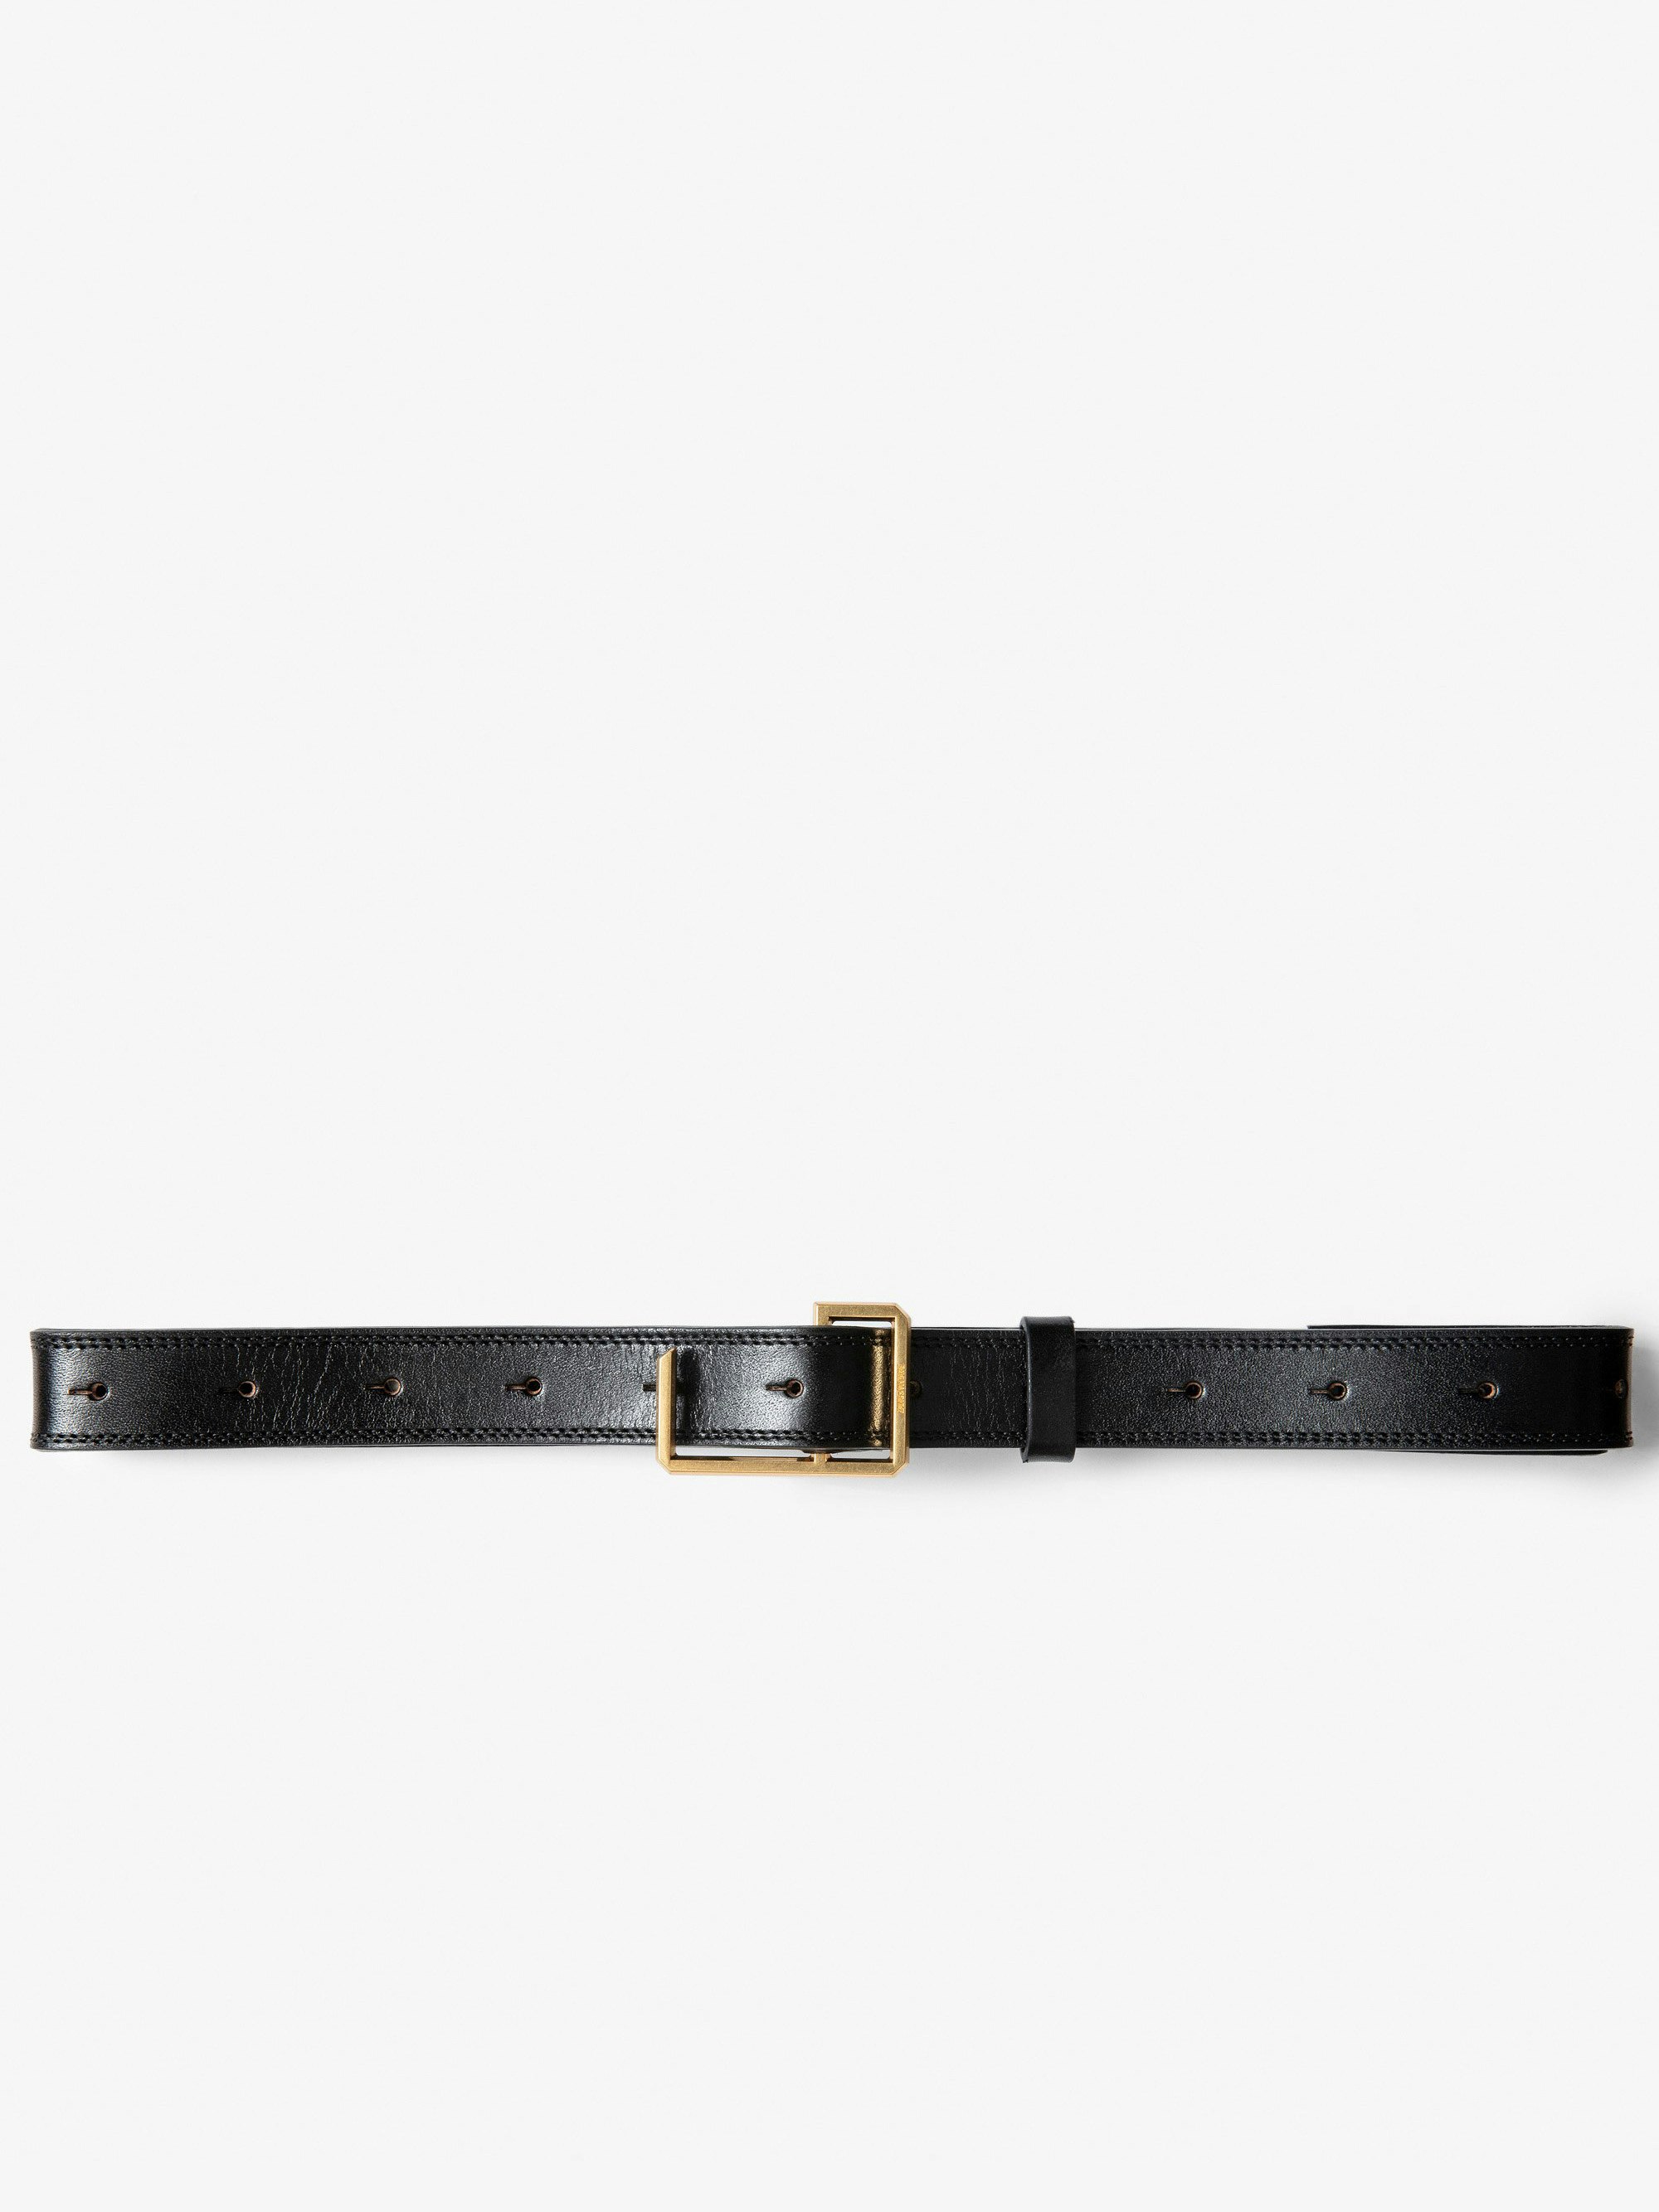 La Cecilia Obsession Belt - Women's belt in black leather with gold-tone C buckle.